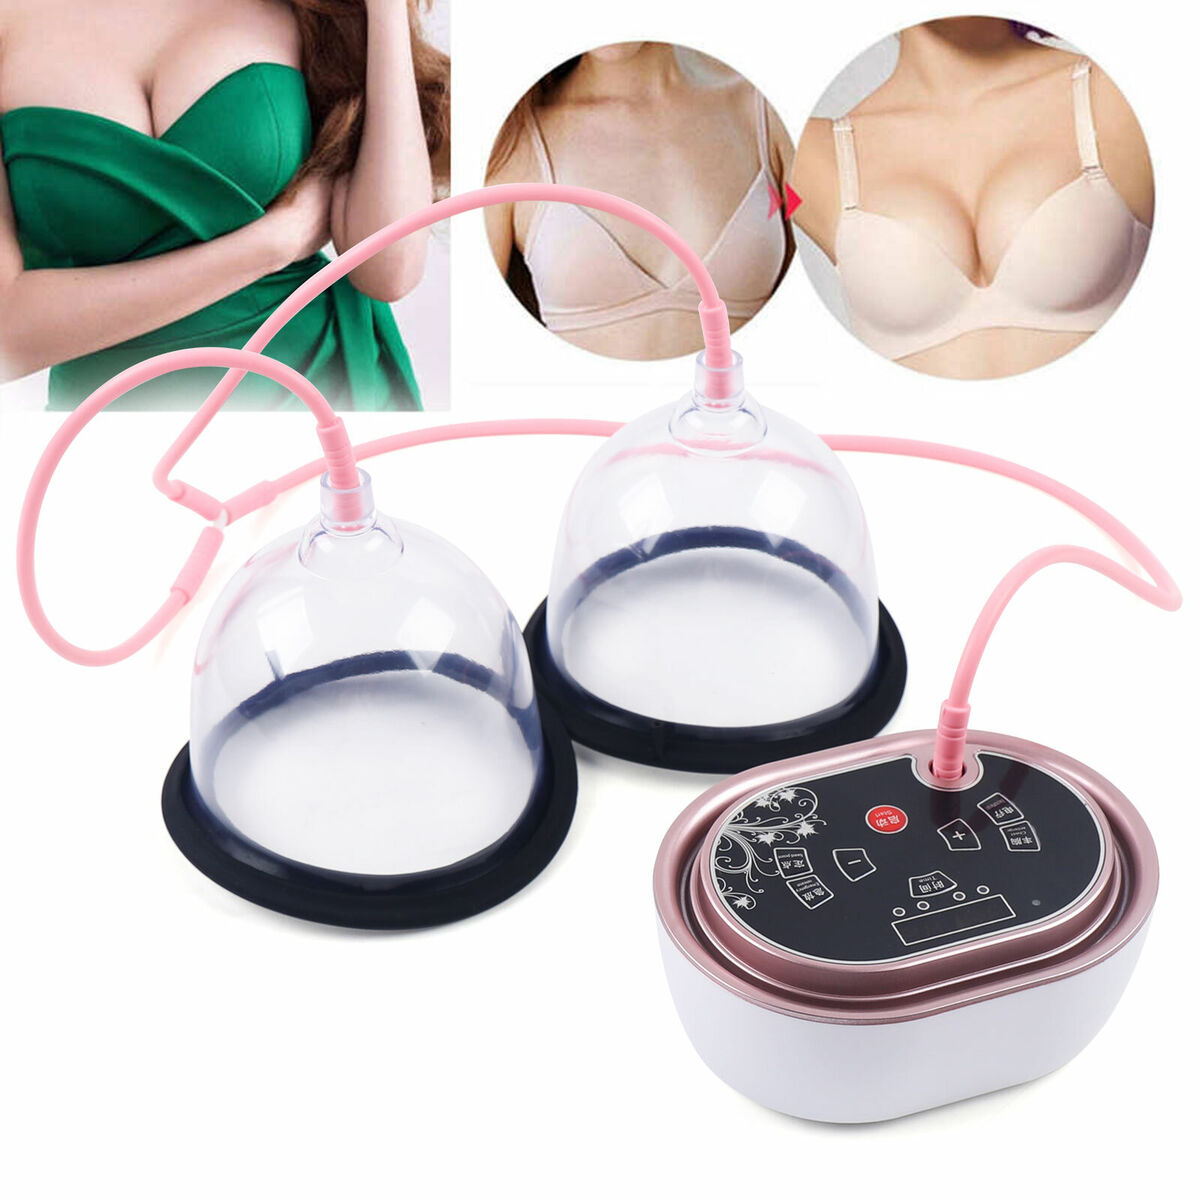 woman owner homemade breast enlarger